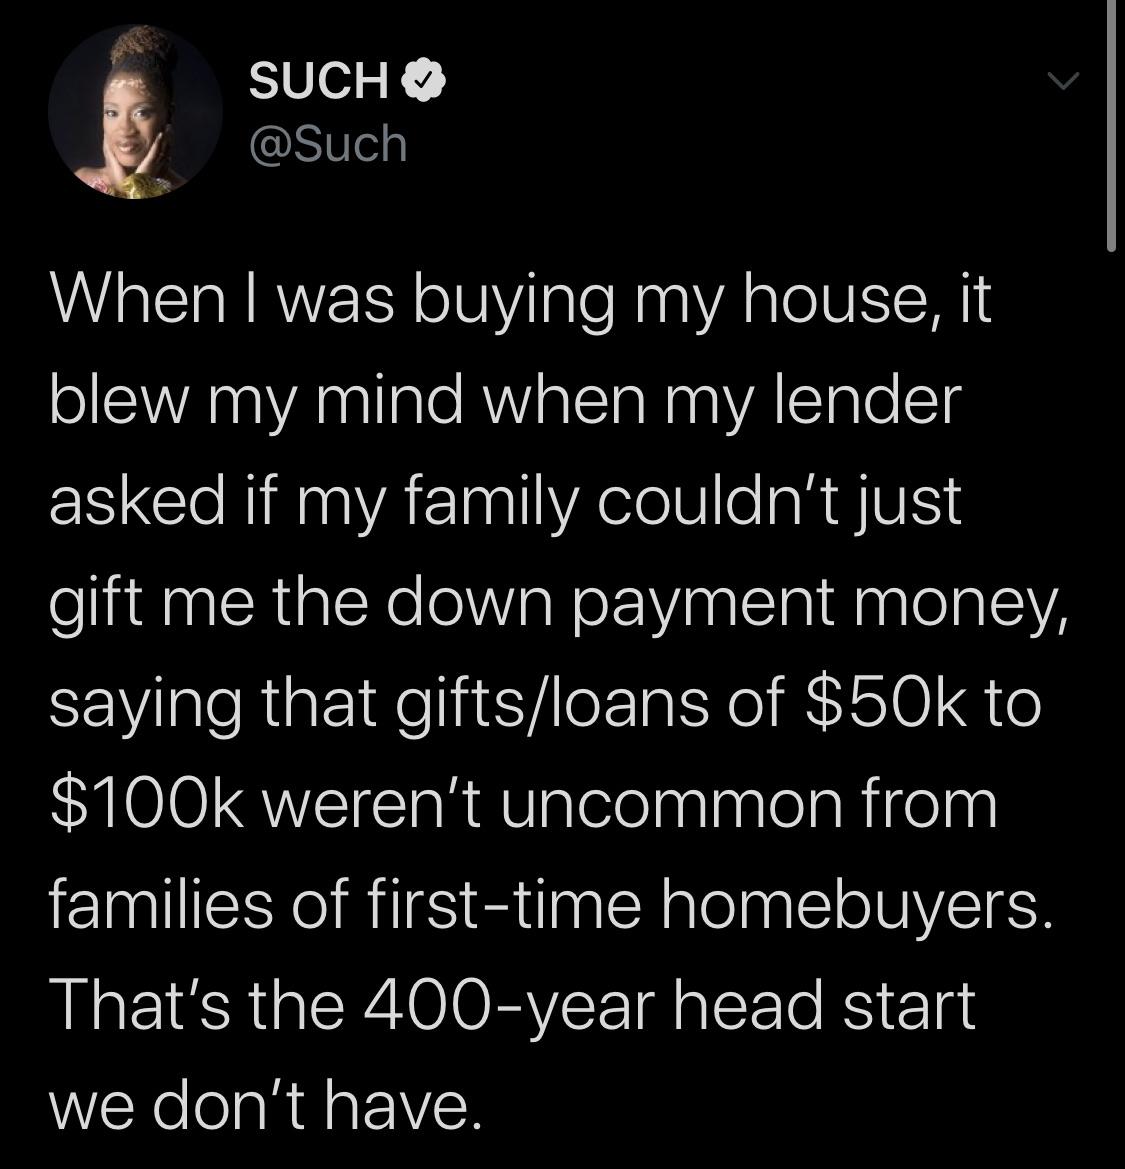 Tweets, Oprah, Hamilton Black Twitter Memes Tweets, Oprah, Hamilton text: SUCH e @Such When I was buying my house, it blew my mind when my lender asked if my family couldn't just gift me the down payment money, saying that gifts/loans of $50k to $100k weren't uncommon from families of first-time homebuyers. That's the 400-year head start we don't have. 